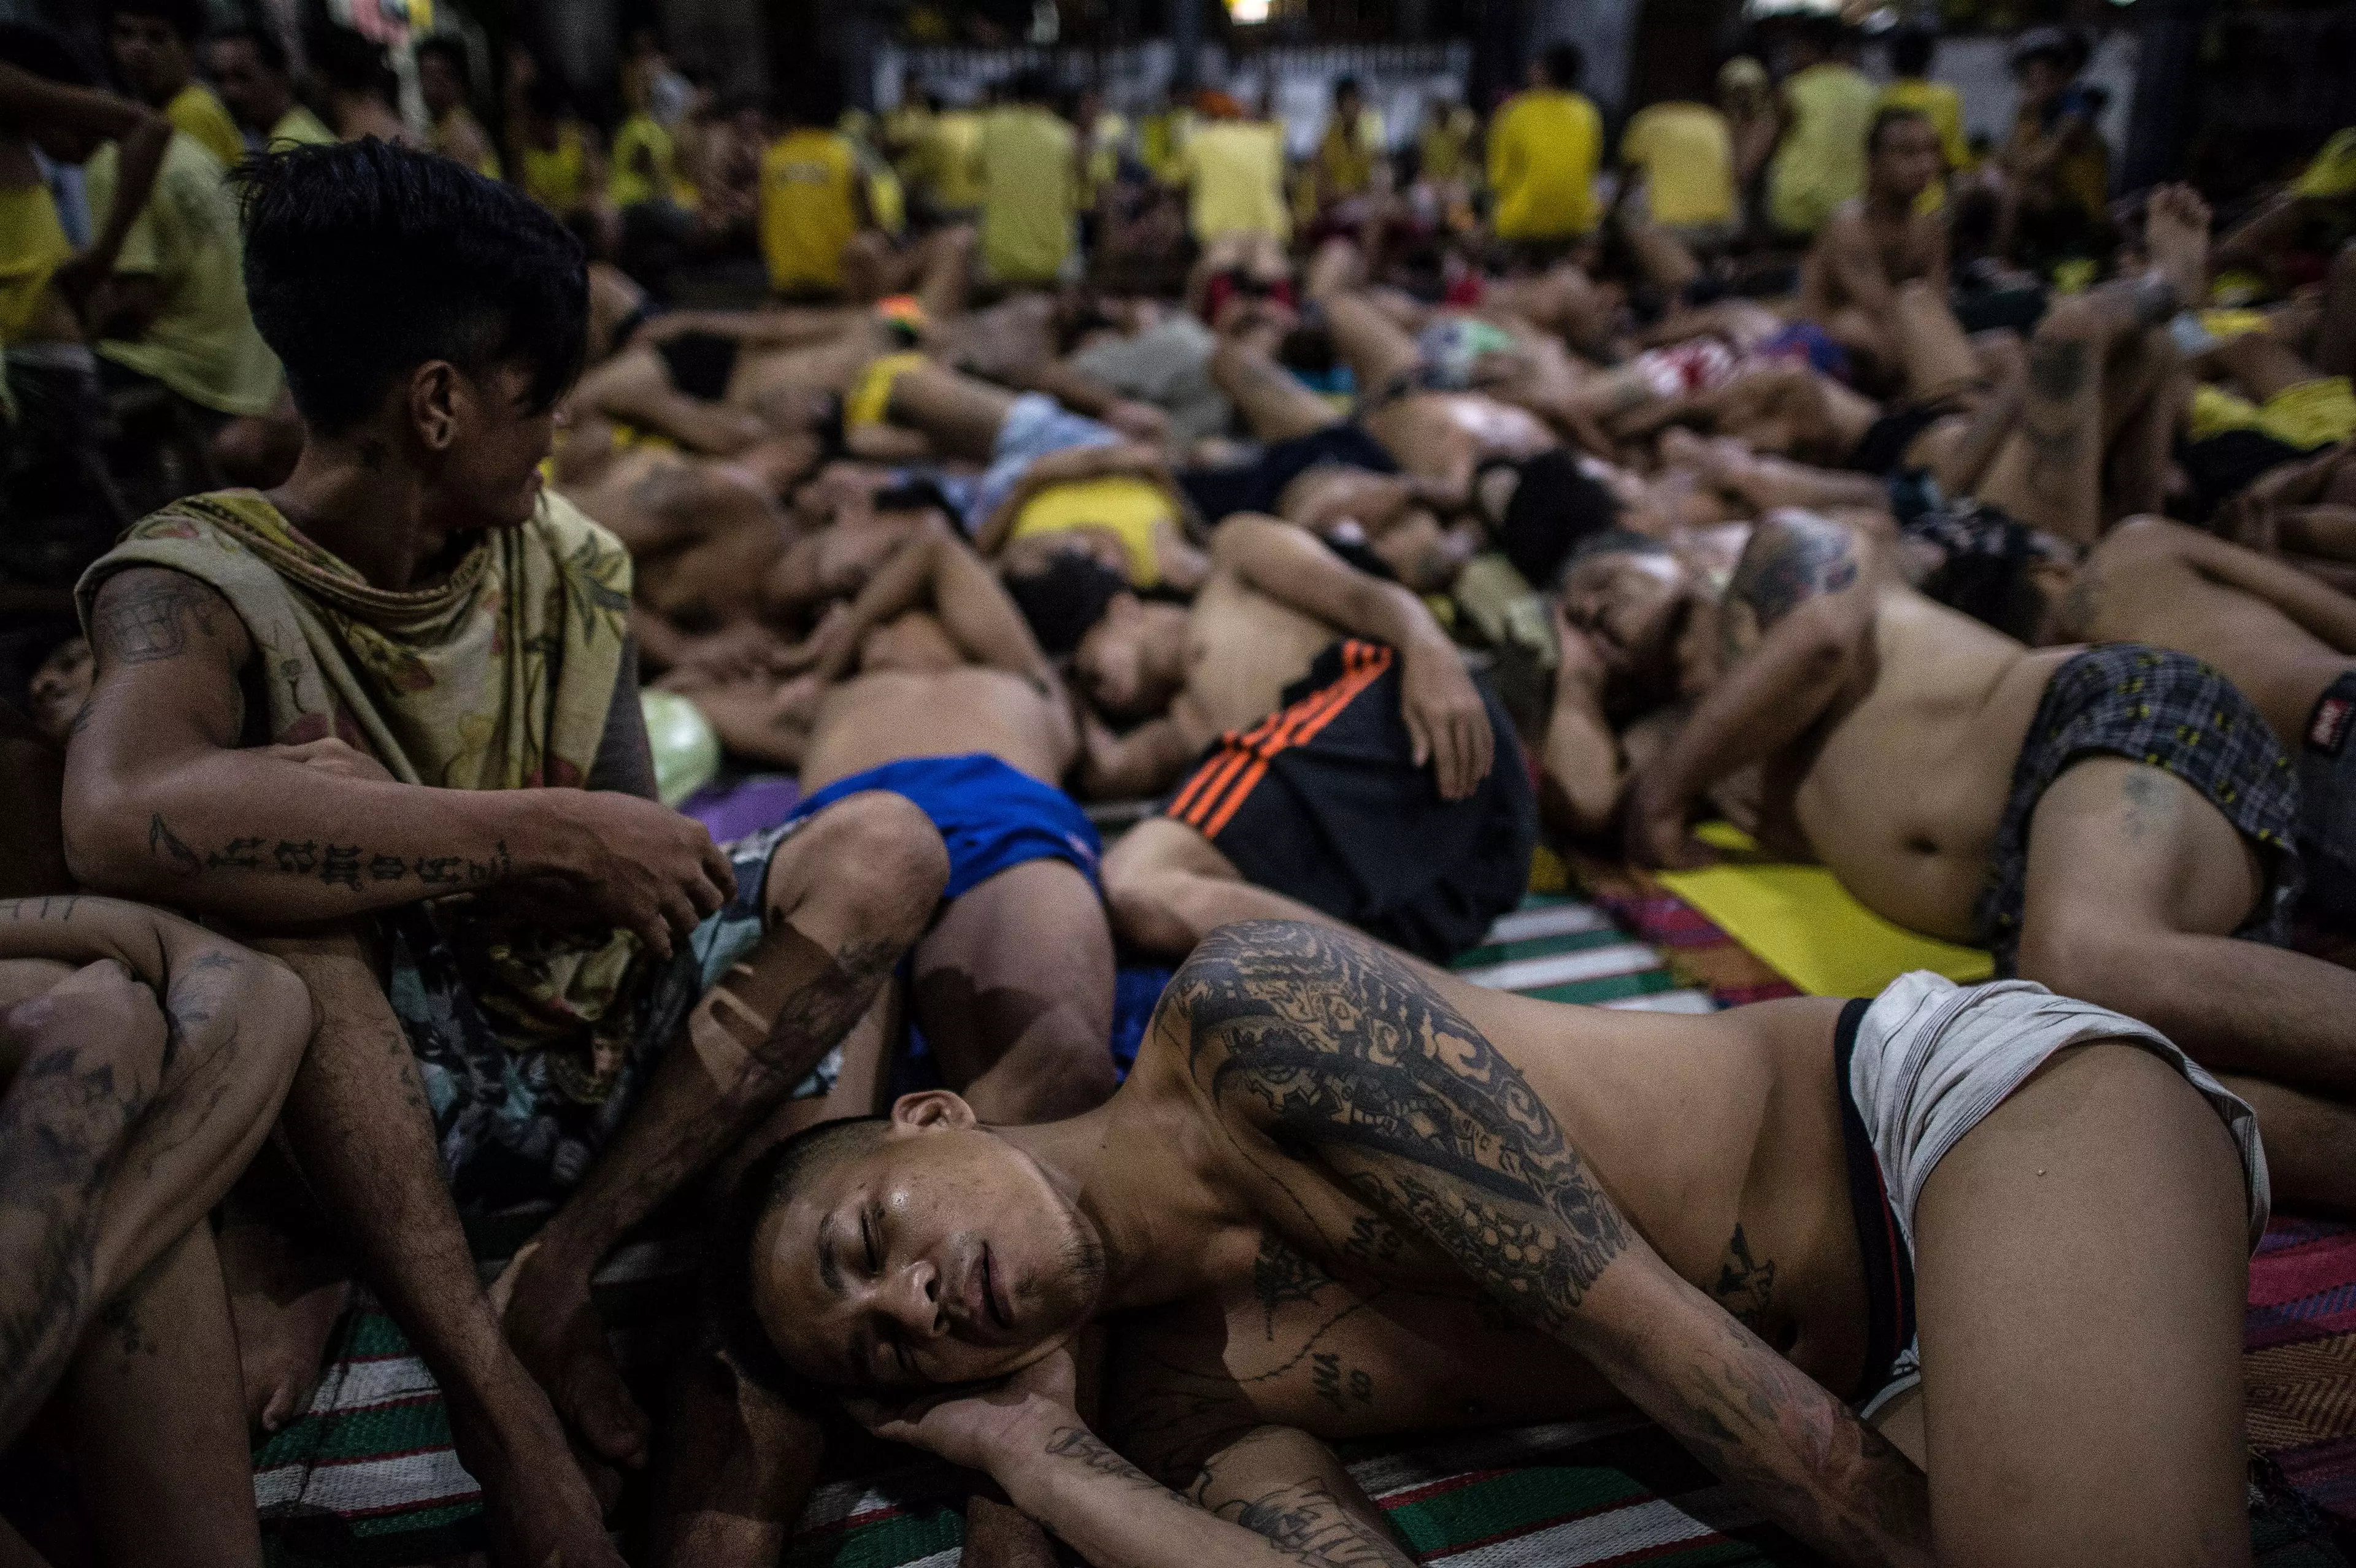 Awful Images Capture The Inhumane Nature Of Imprisonment In A Philippines Jail